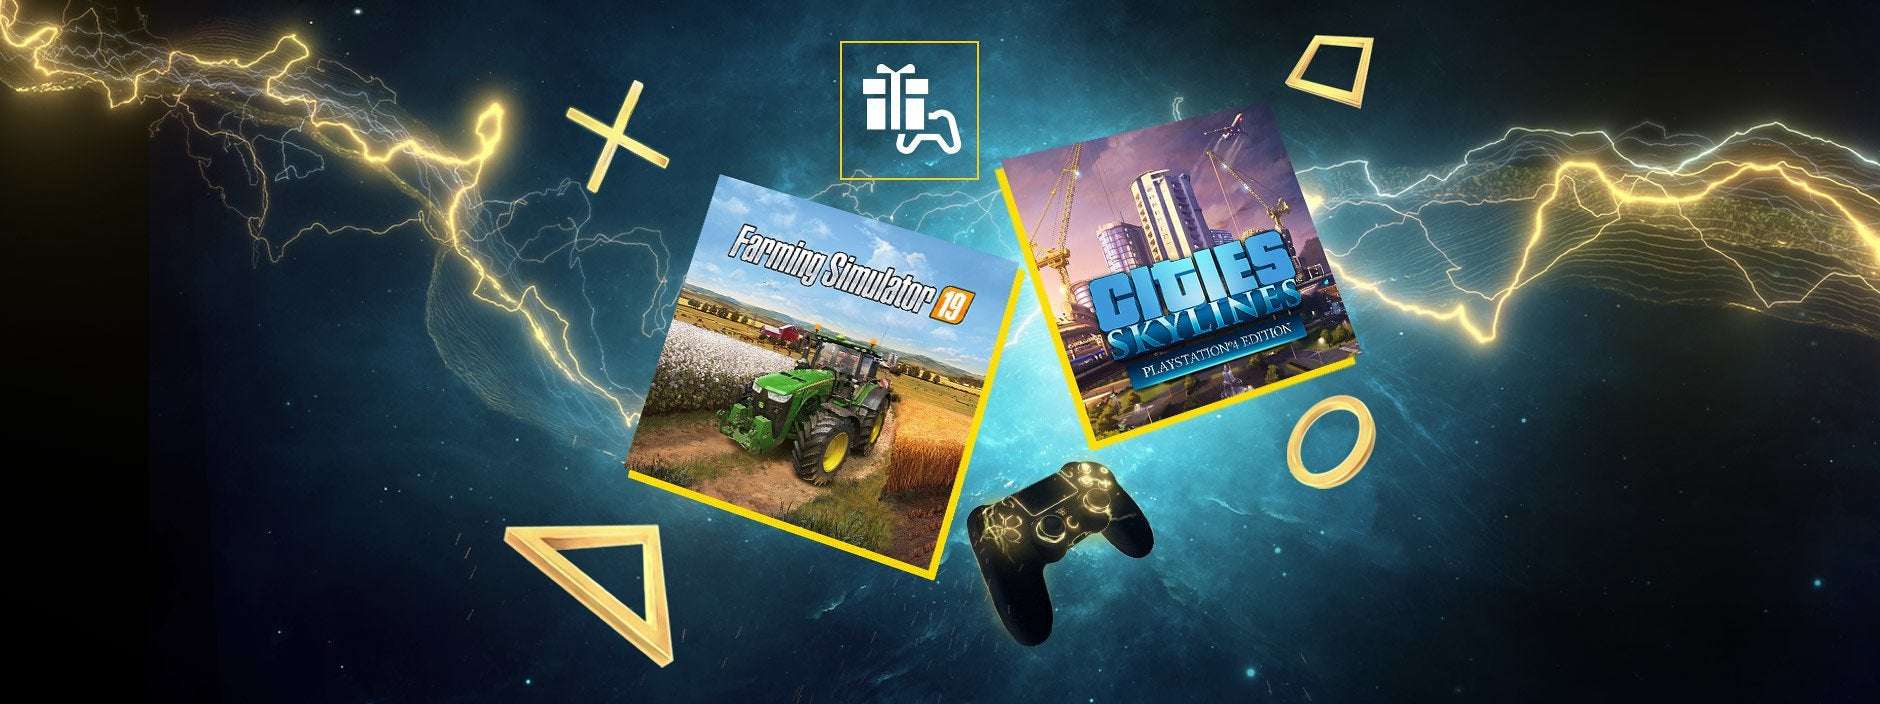 image for Cities: Skylines and Farming Simulator 19 are your PlayStation Plus games for May